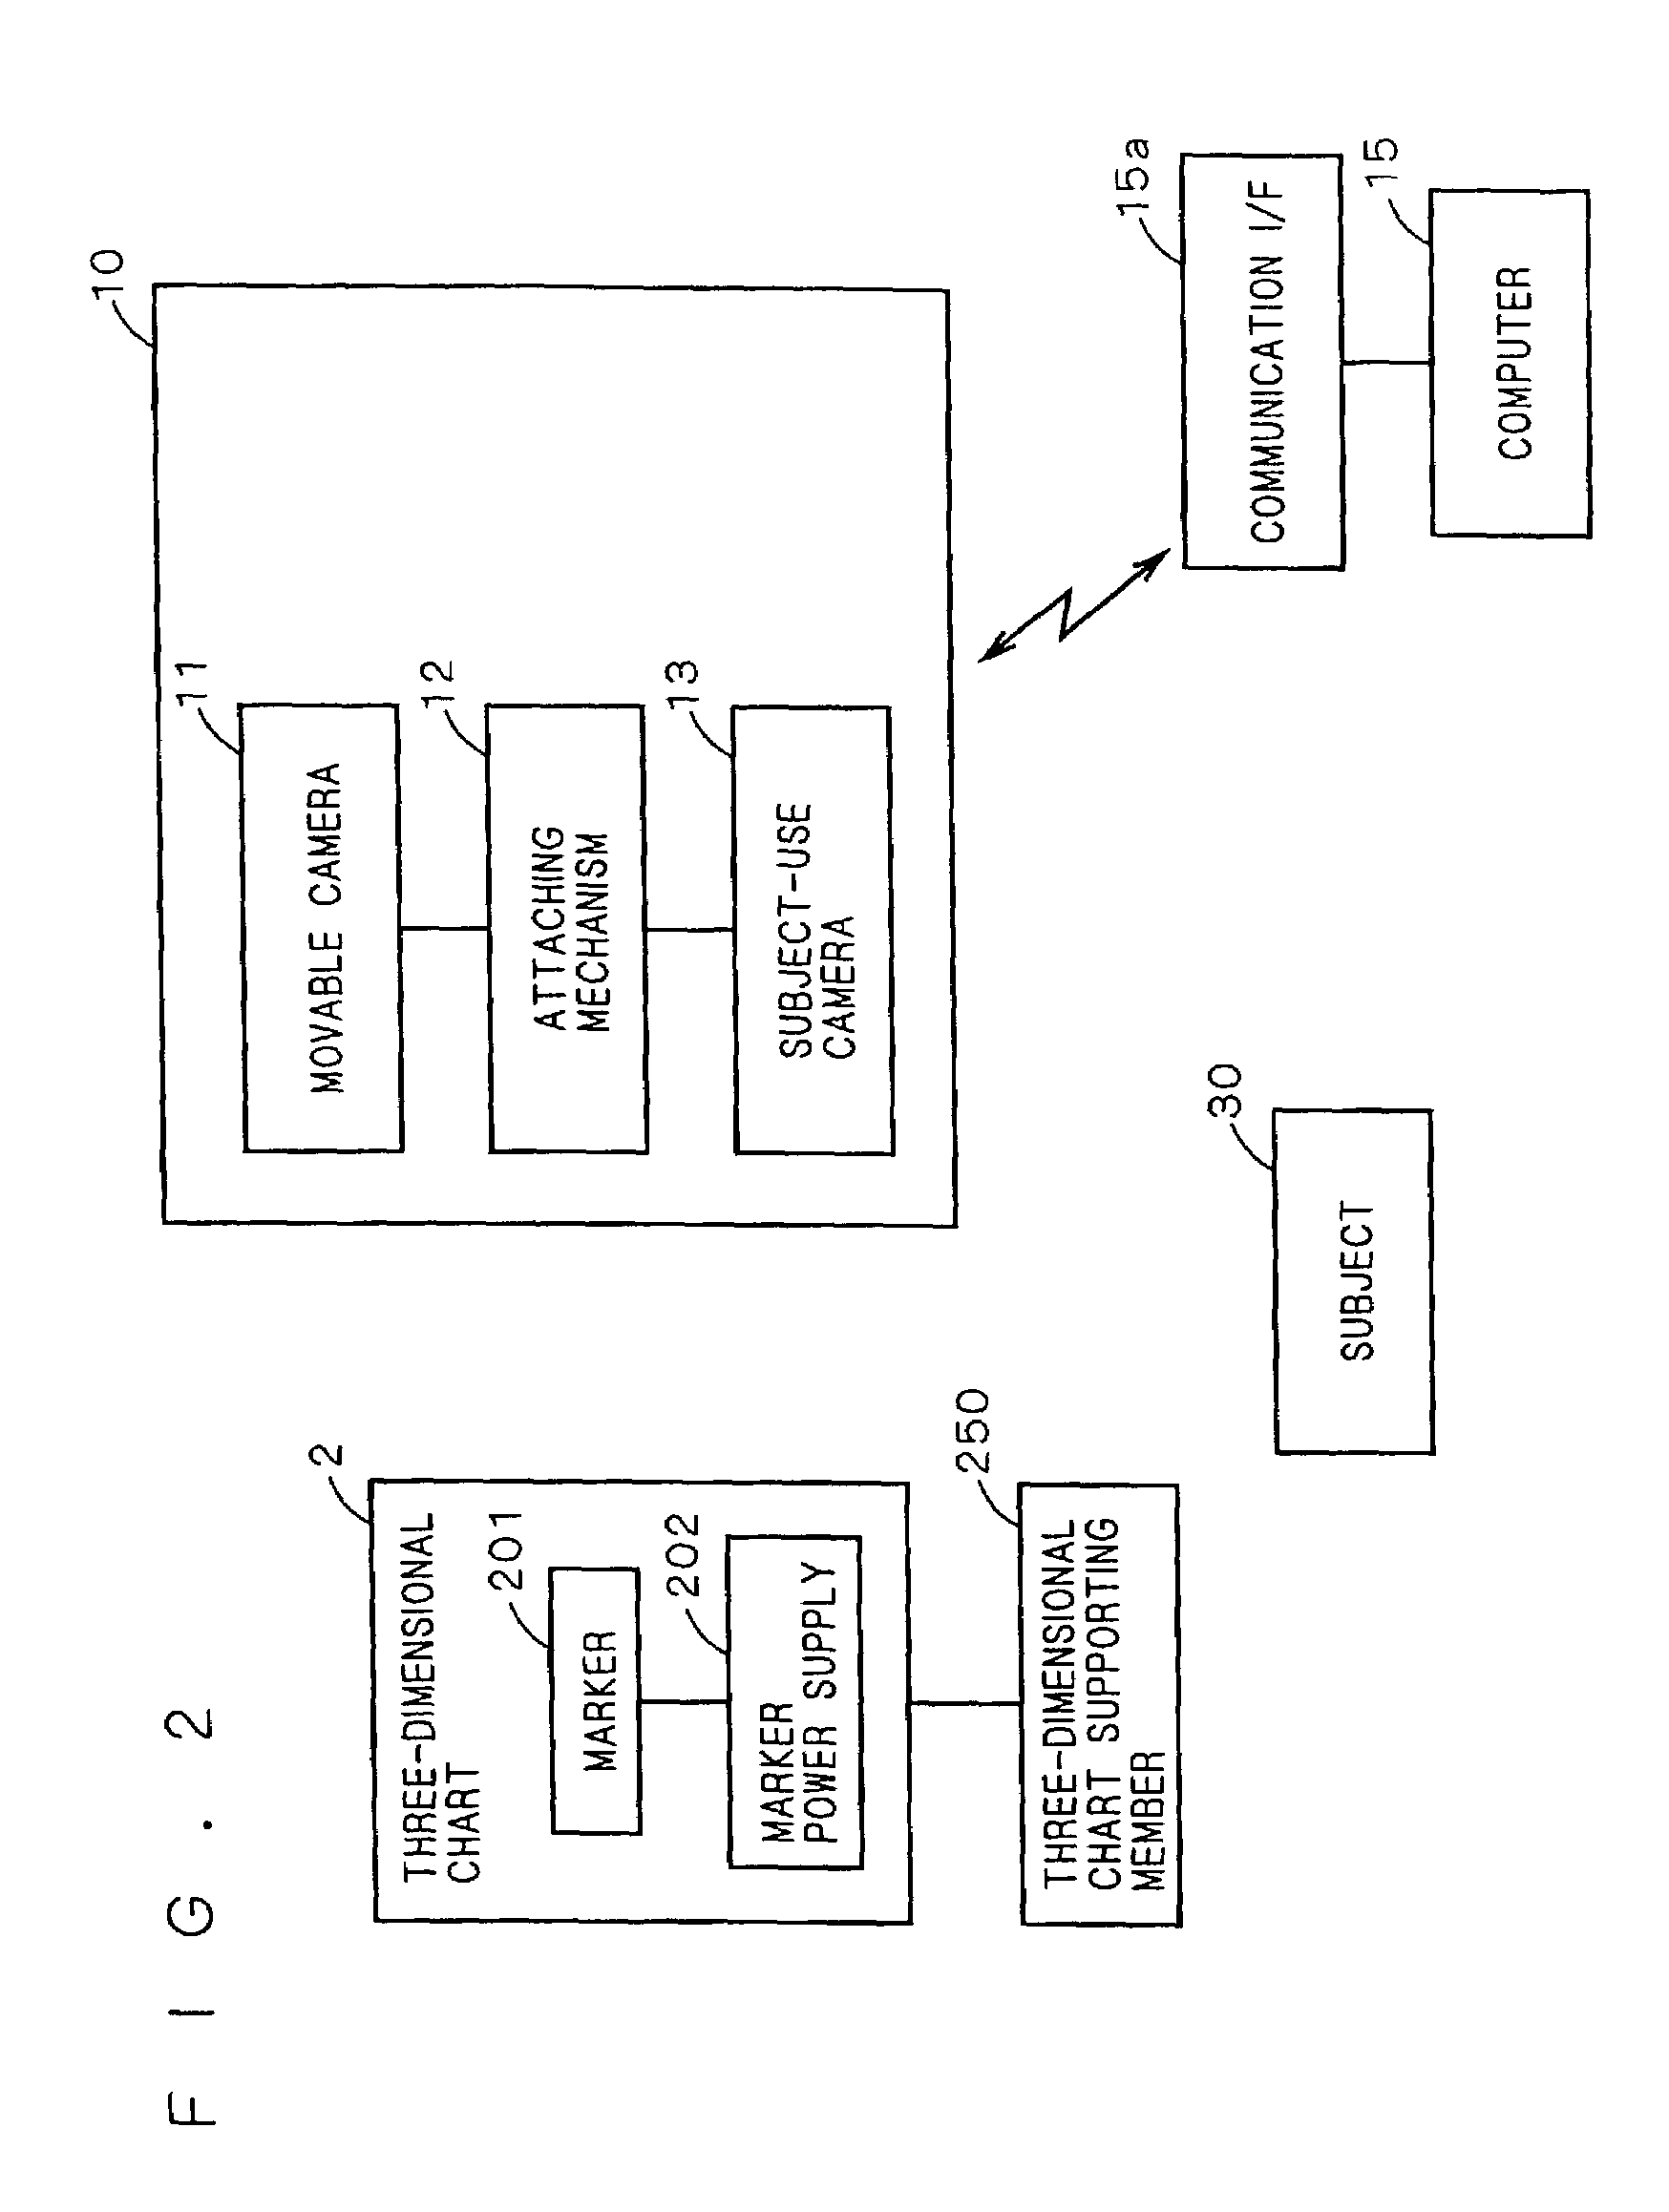 Image pickup system employing a three-dimensional reference object